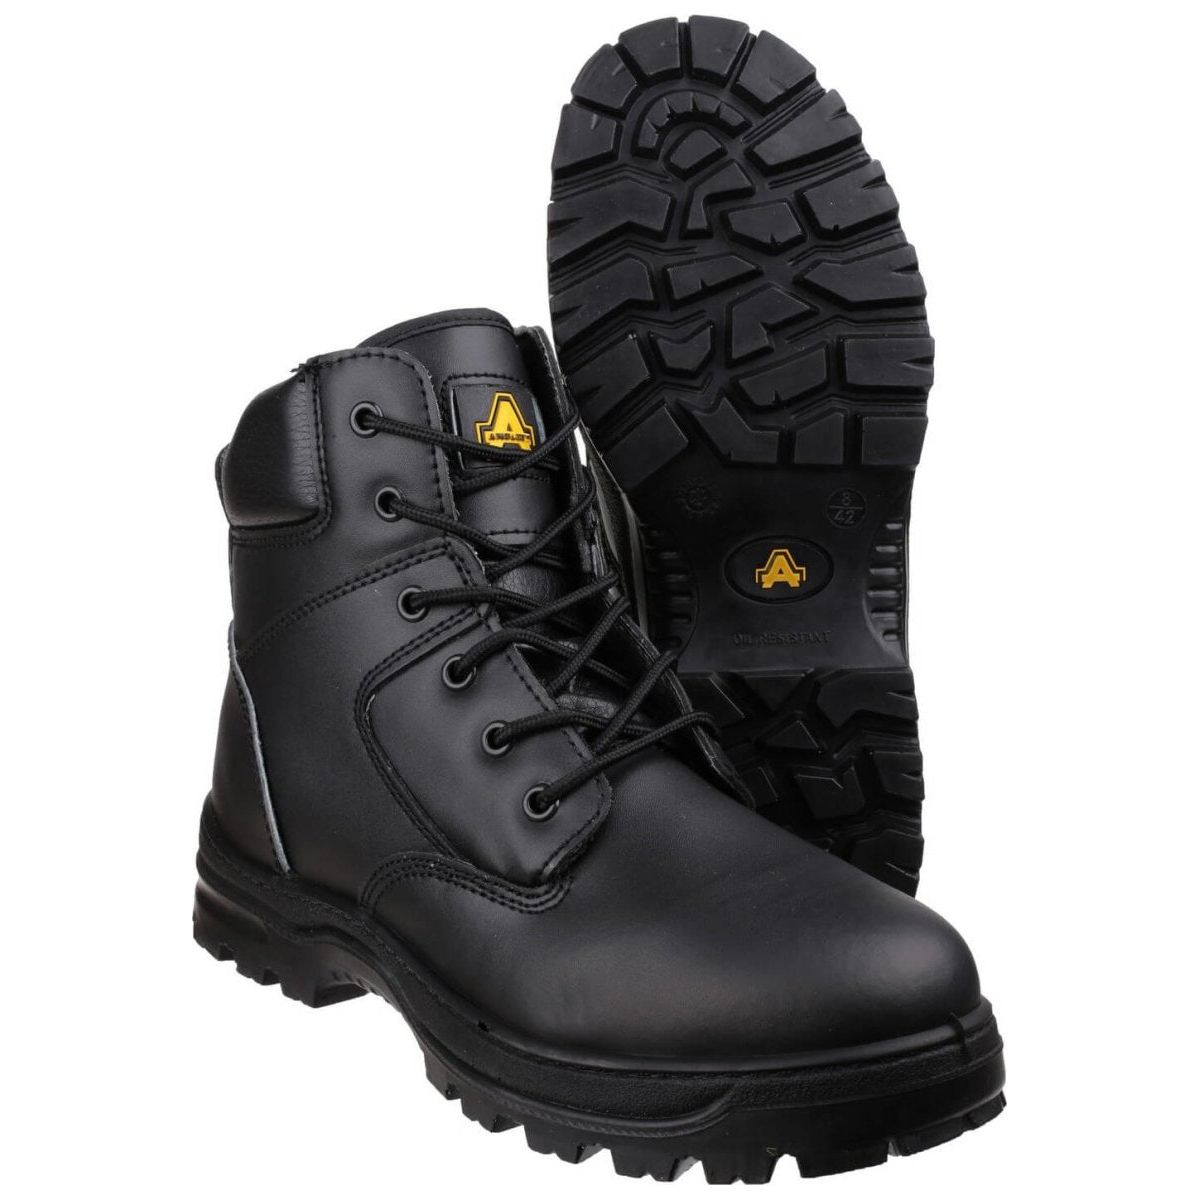 Amblers Fs84 Antistatic Lace Up Safety Boots Mens - workweargurus.com